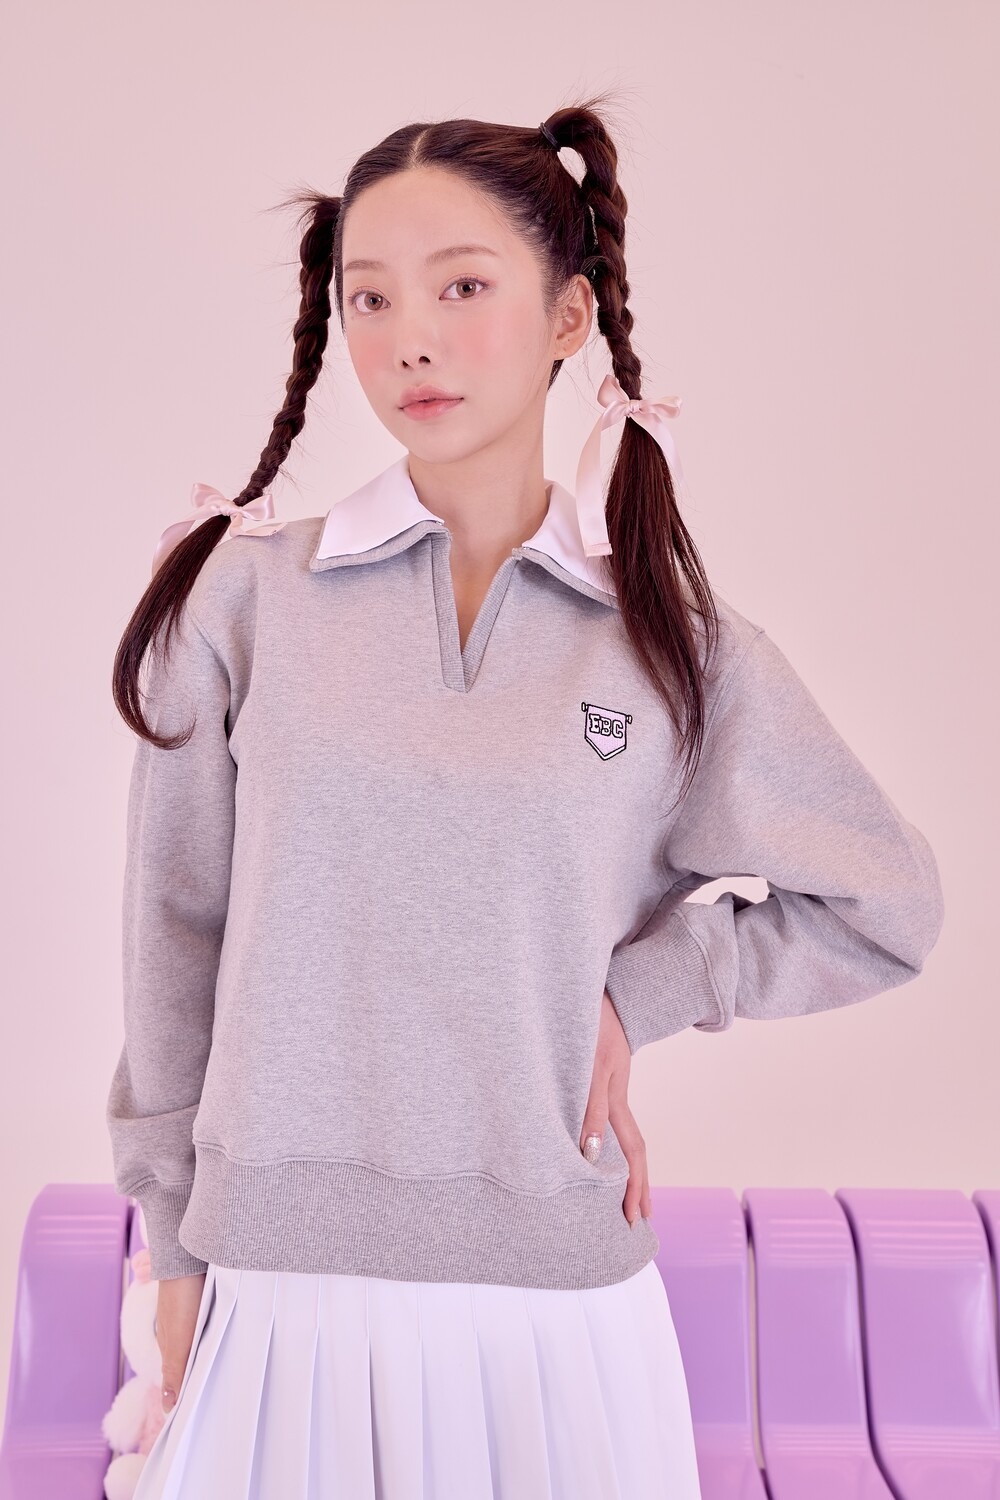 YOU CAN DO IT COLLARED SWEATSHIRT